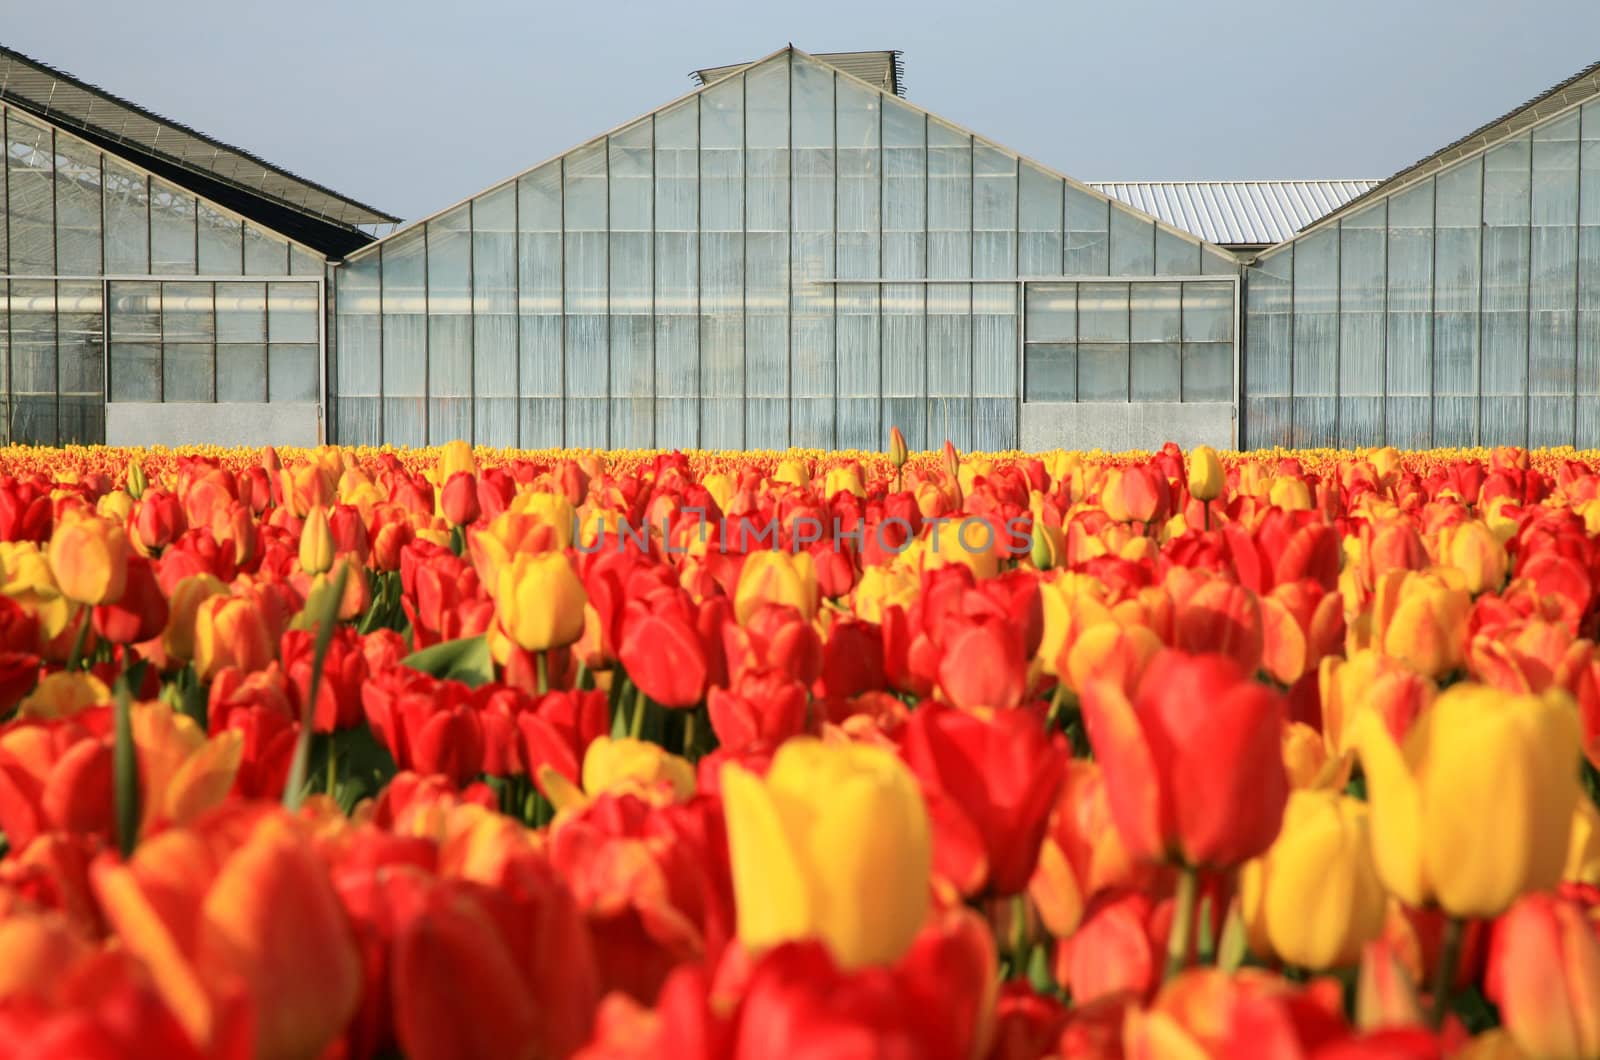 Greenhouses and tulips by fotokate